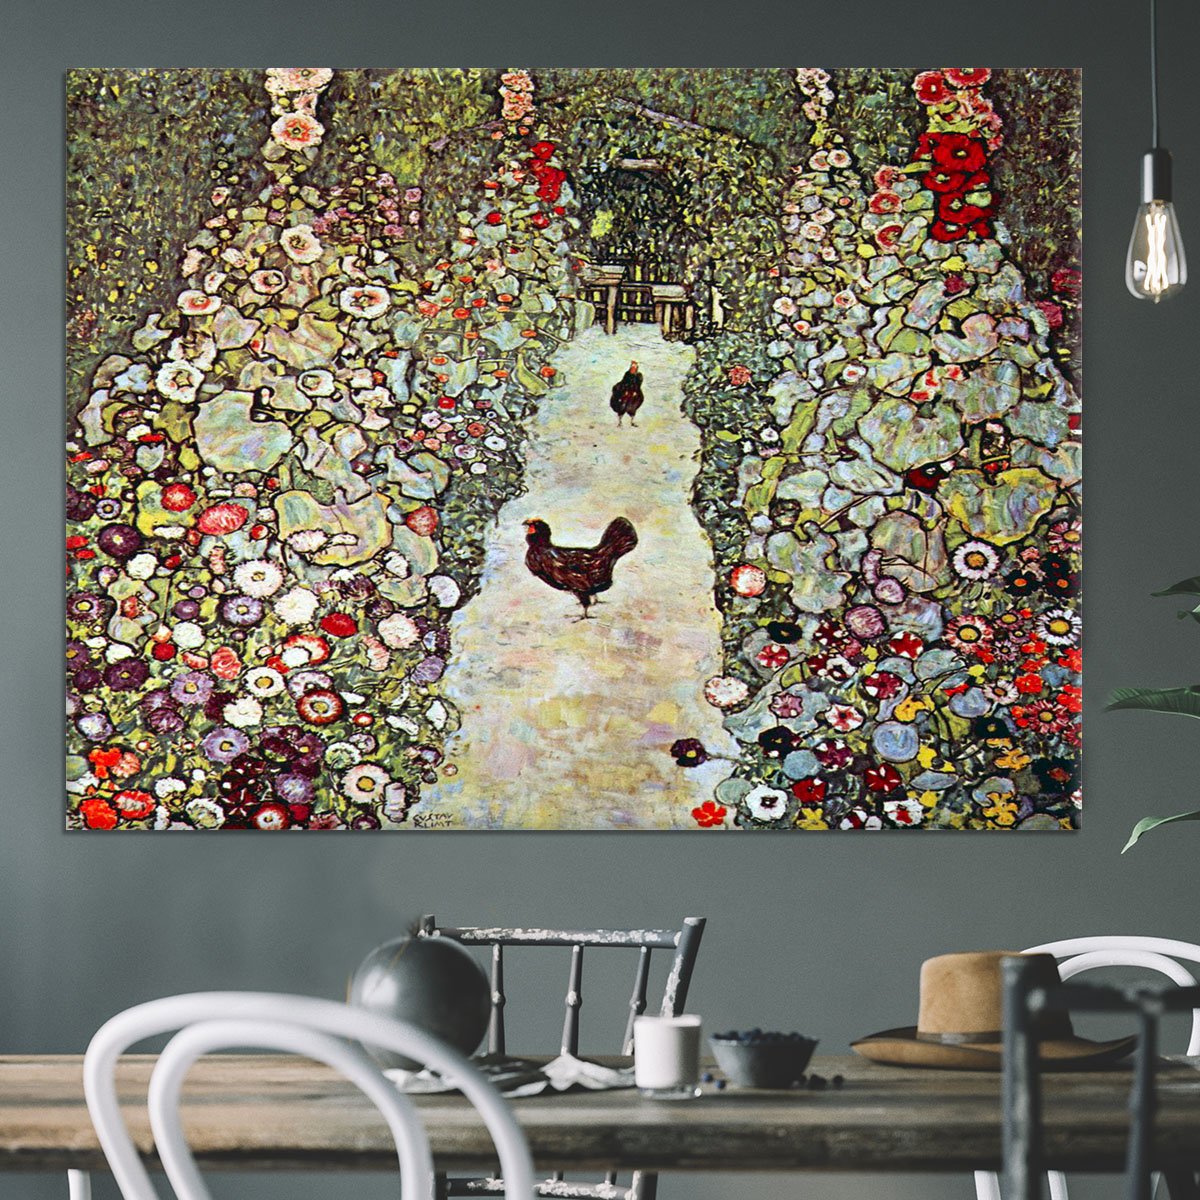 Garden Path with Chickens by Klimt Canvas Print or Poster